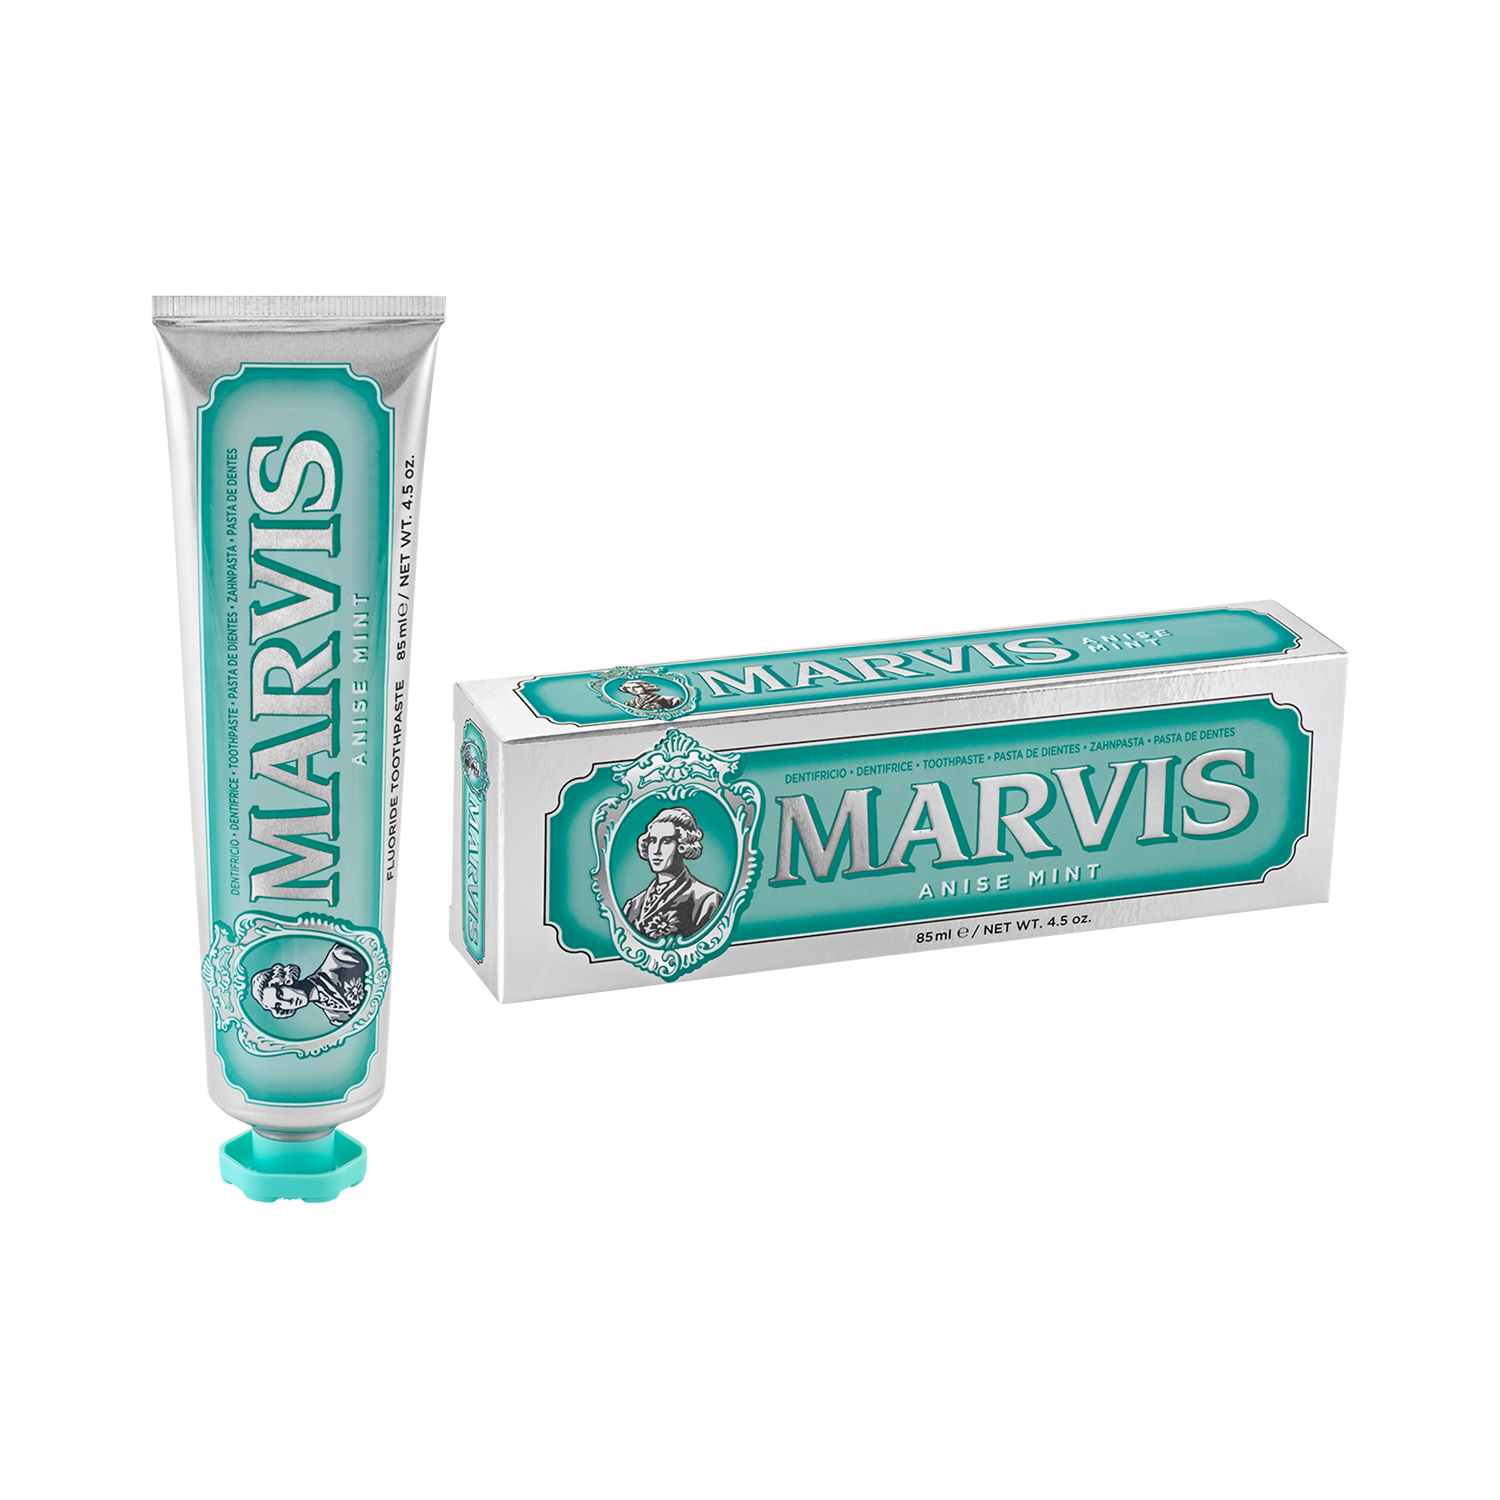 Marvis - Anise Mint - Zahncreme